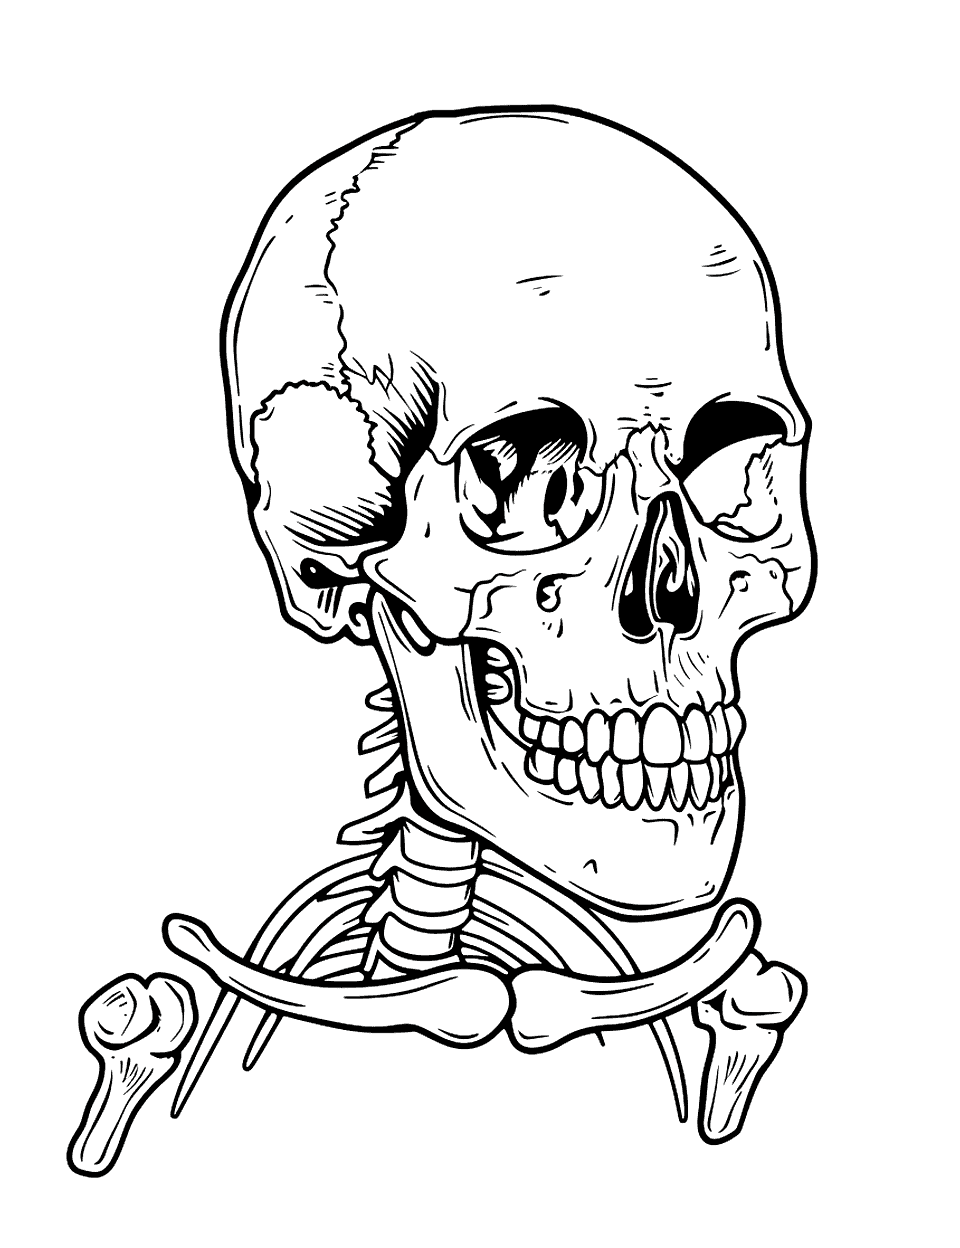 Realistic Human Skull Skeleton Coloring Page - A detailed and realistic drawing of a human skull.